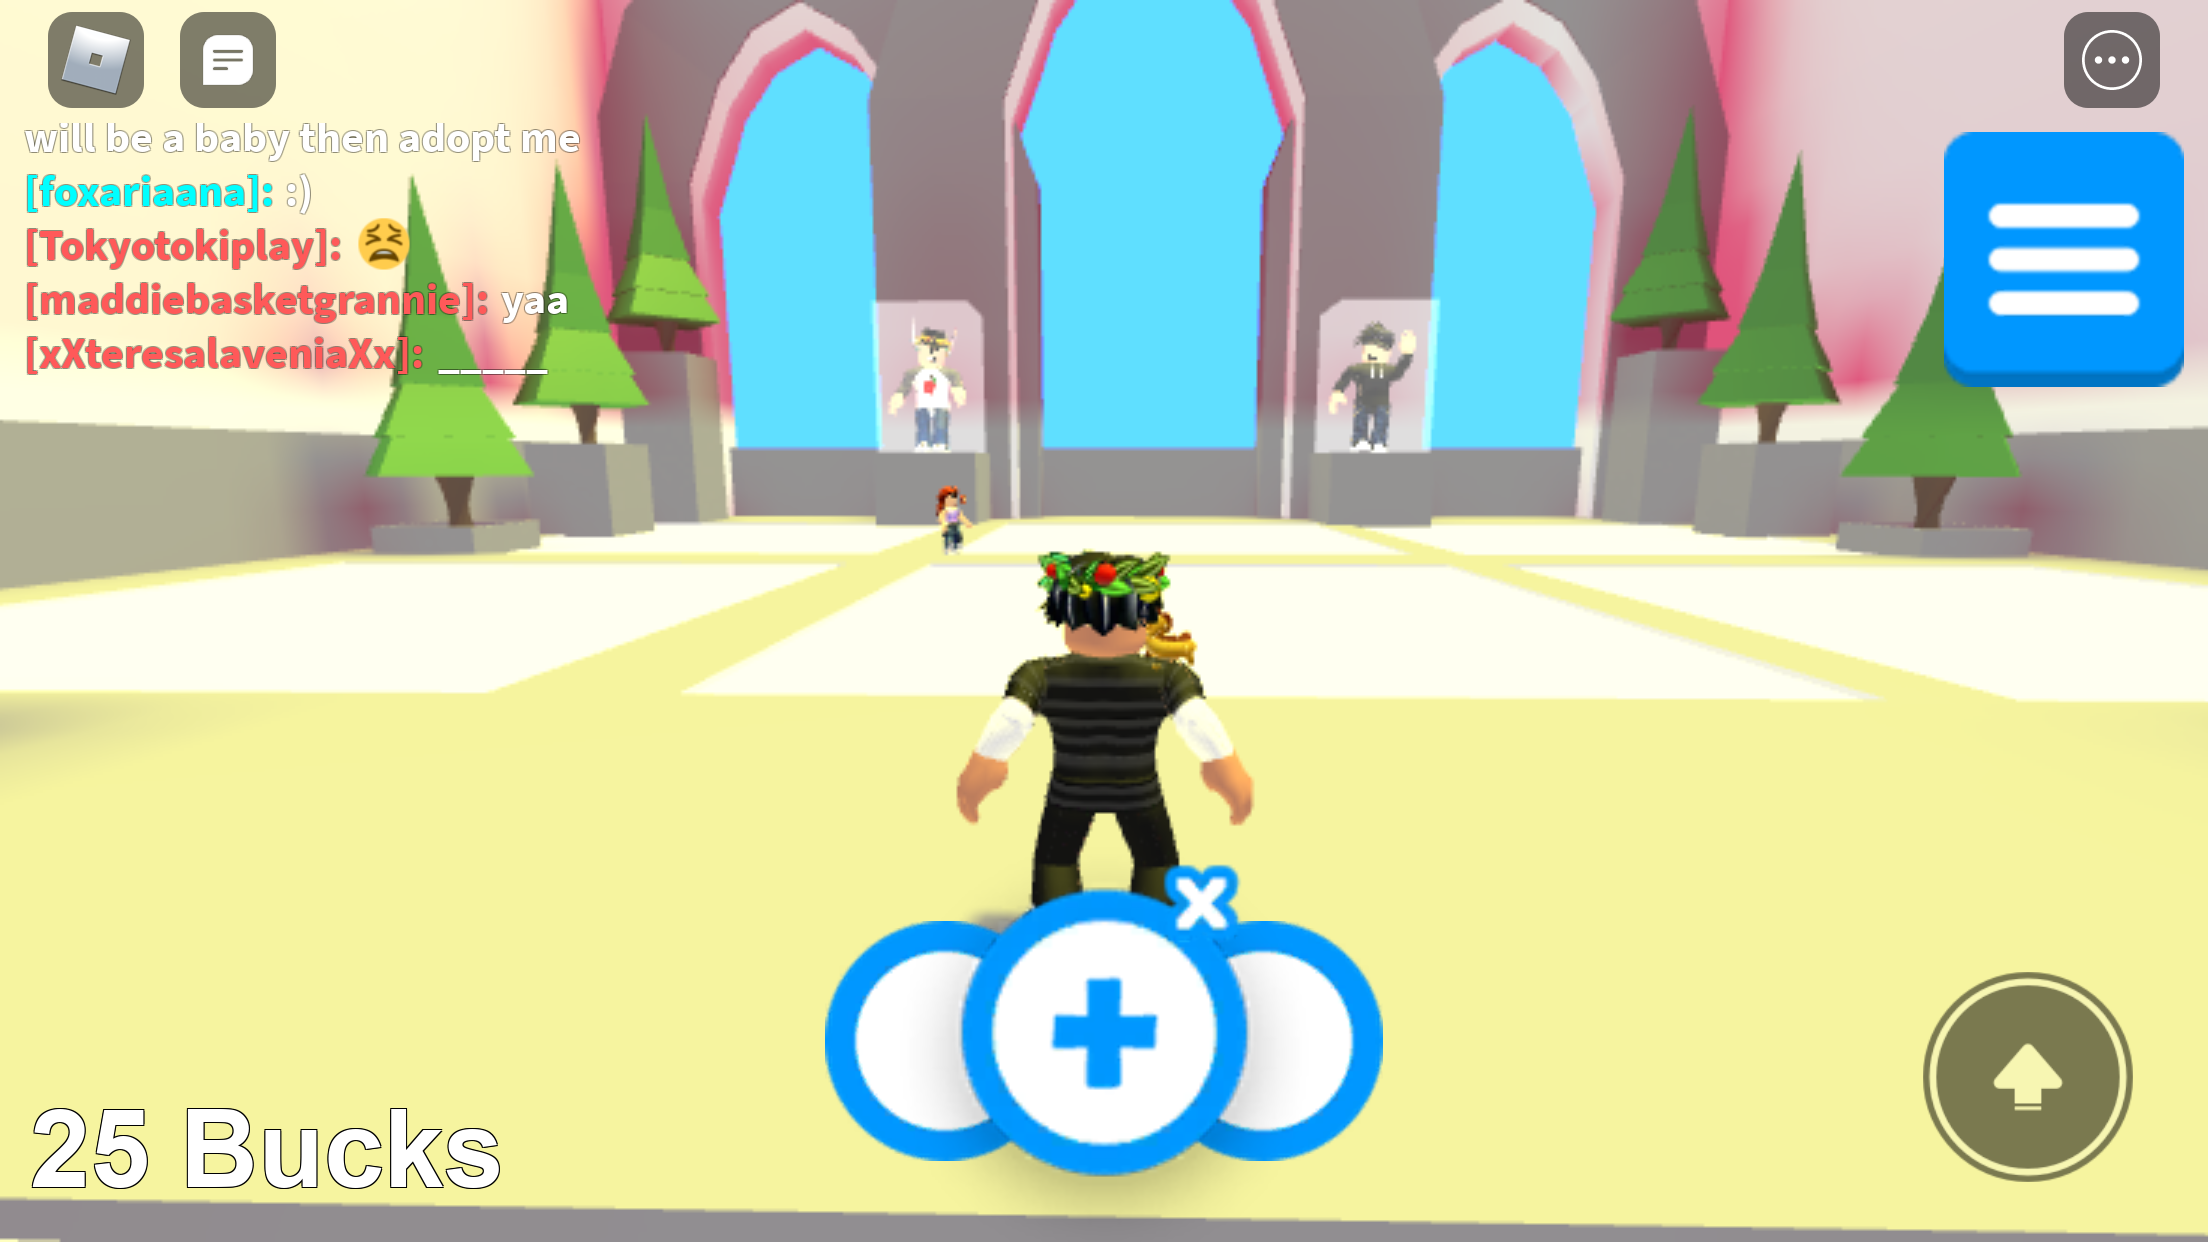 Guys There Is A Game Tht Has The Old Adopt Me Version O Fandom - roblox game adopt me map